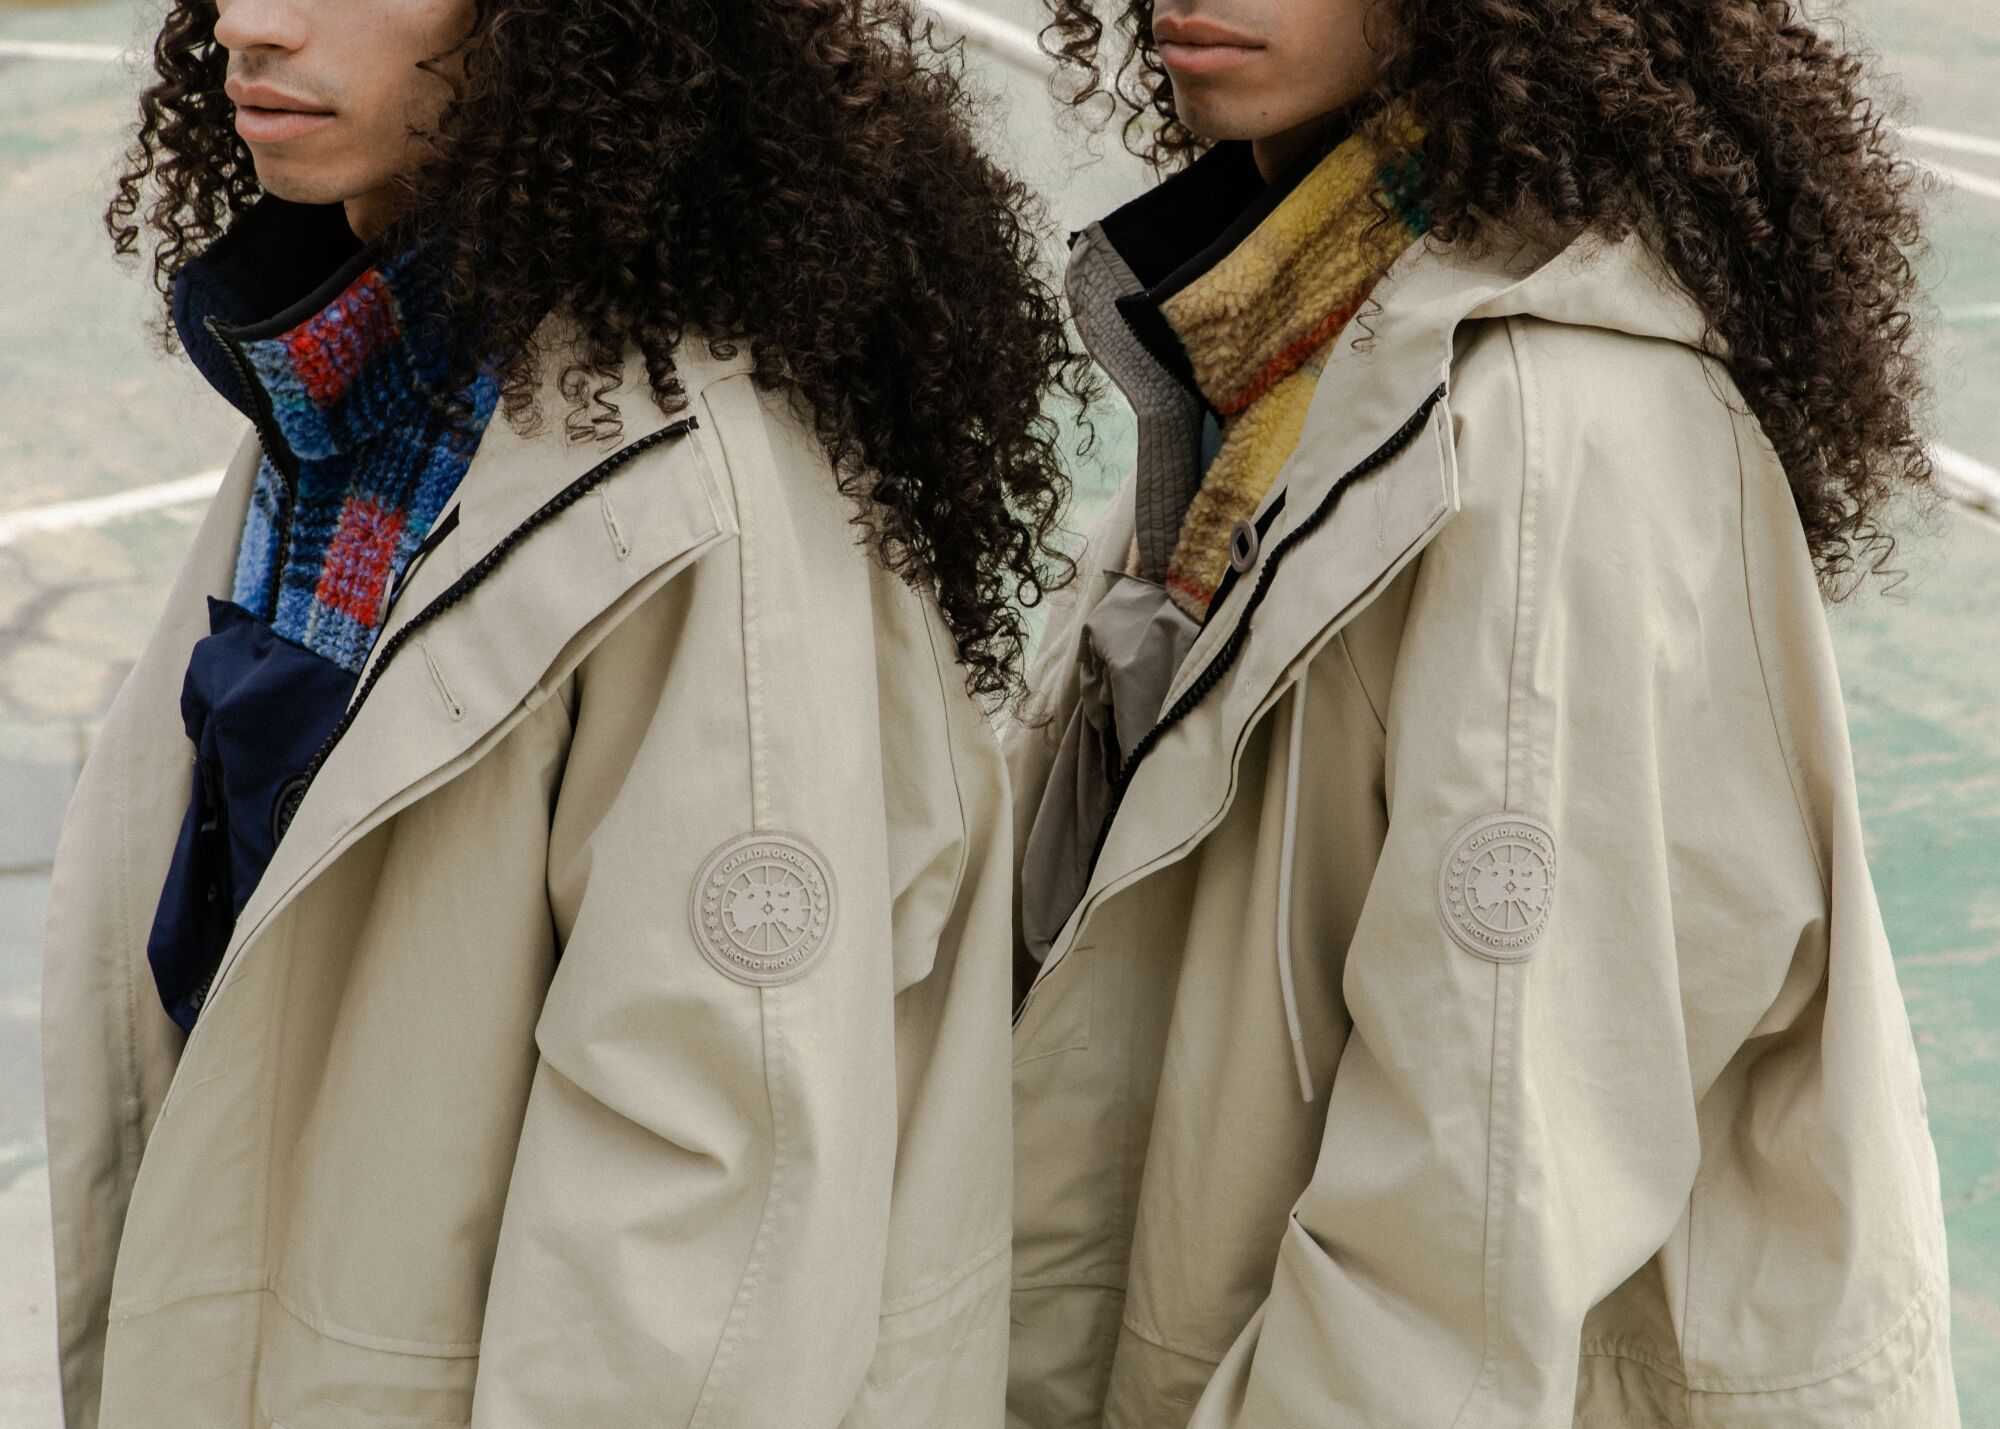 A close-up on the torsos of two models wearing beige parkas with a logo on the upper left shoulder.